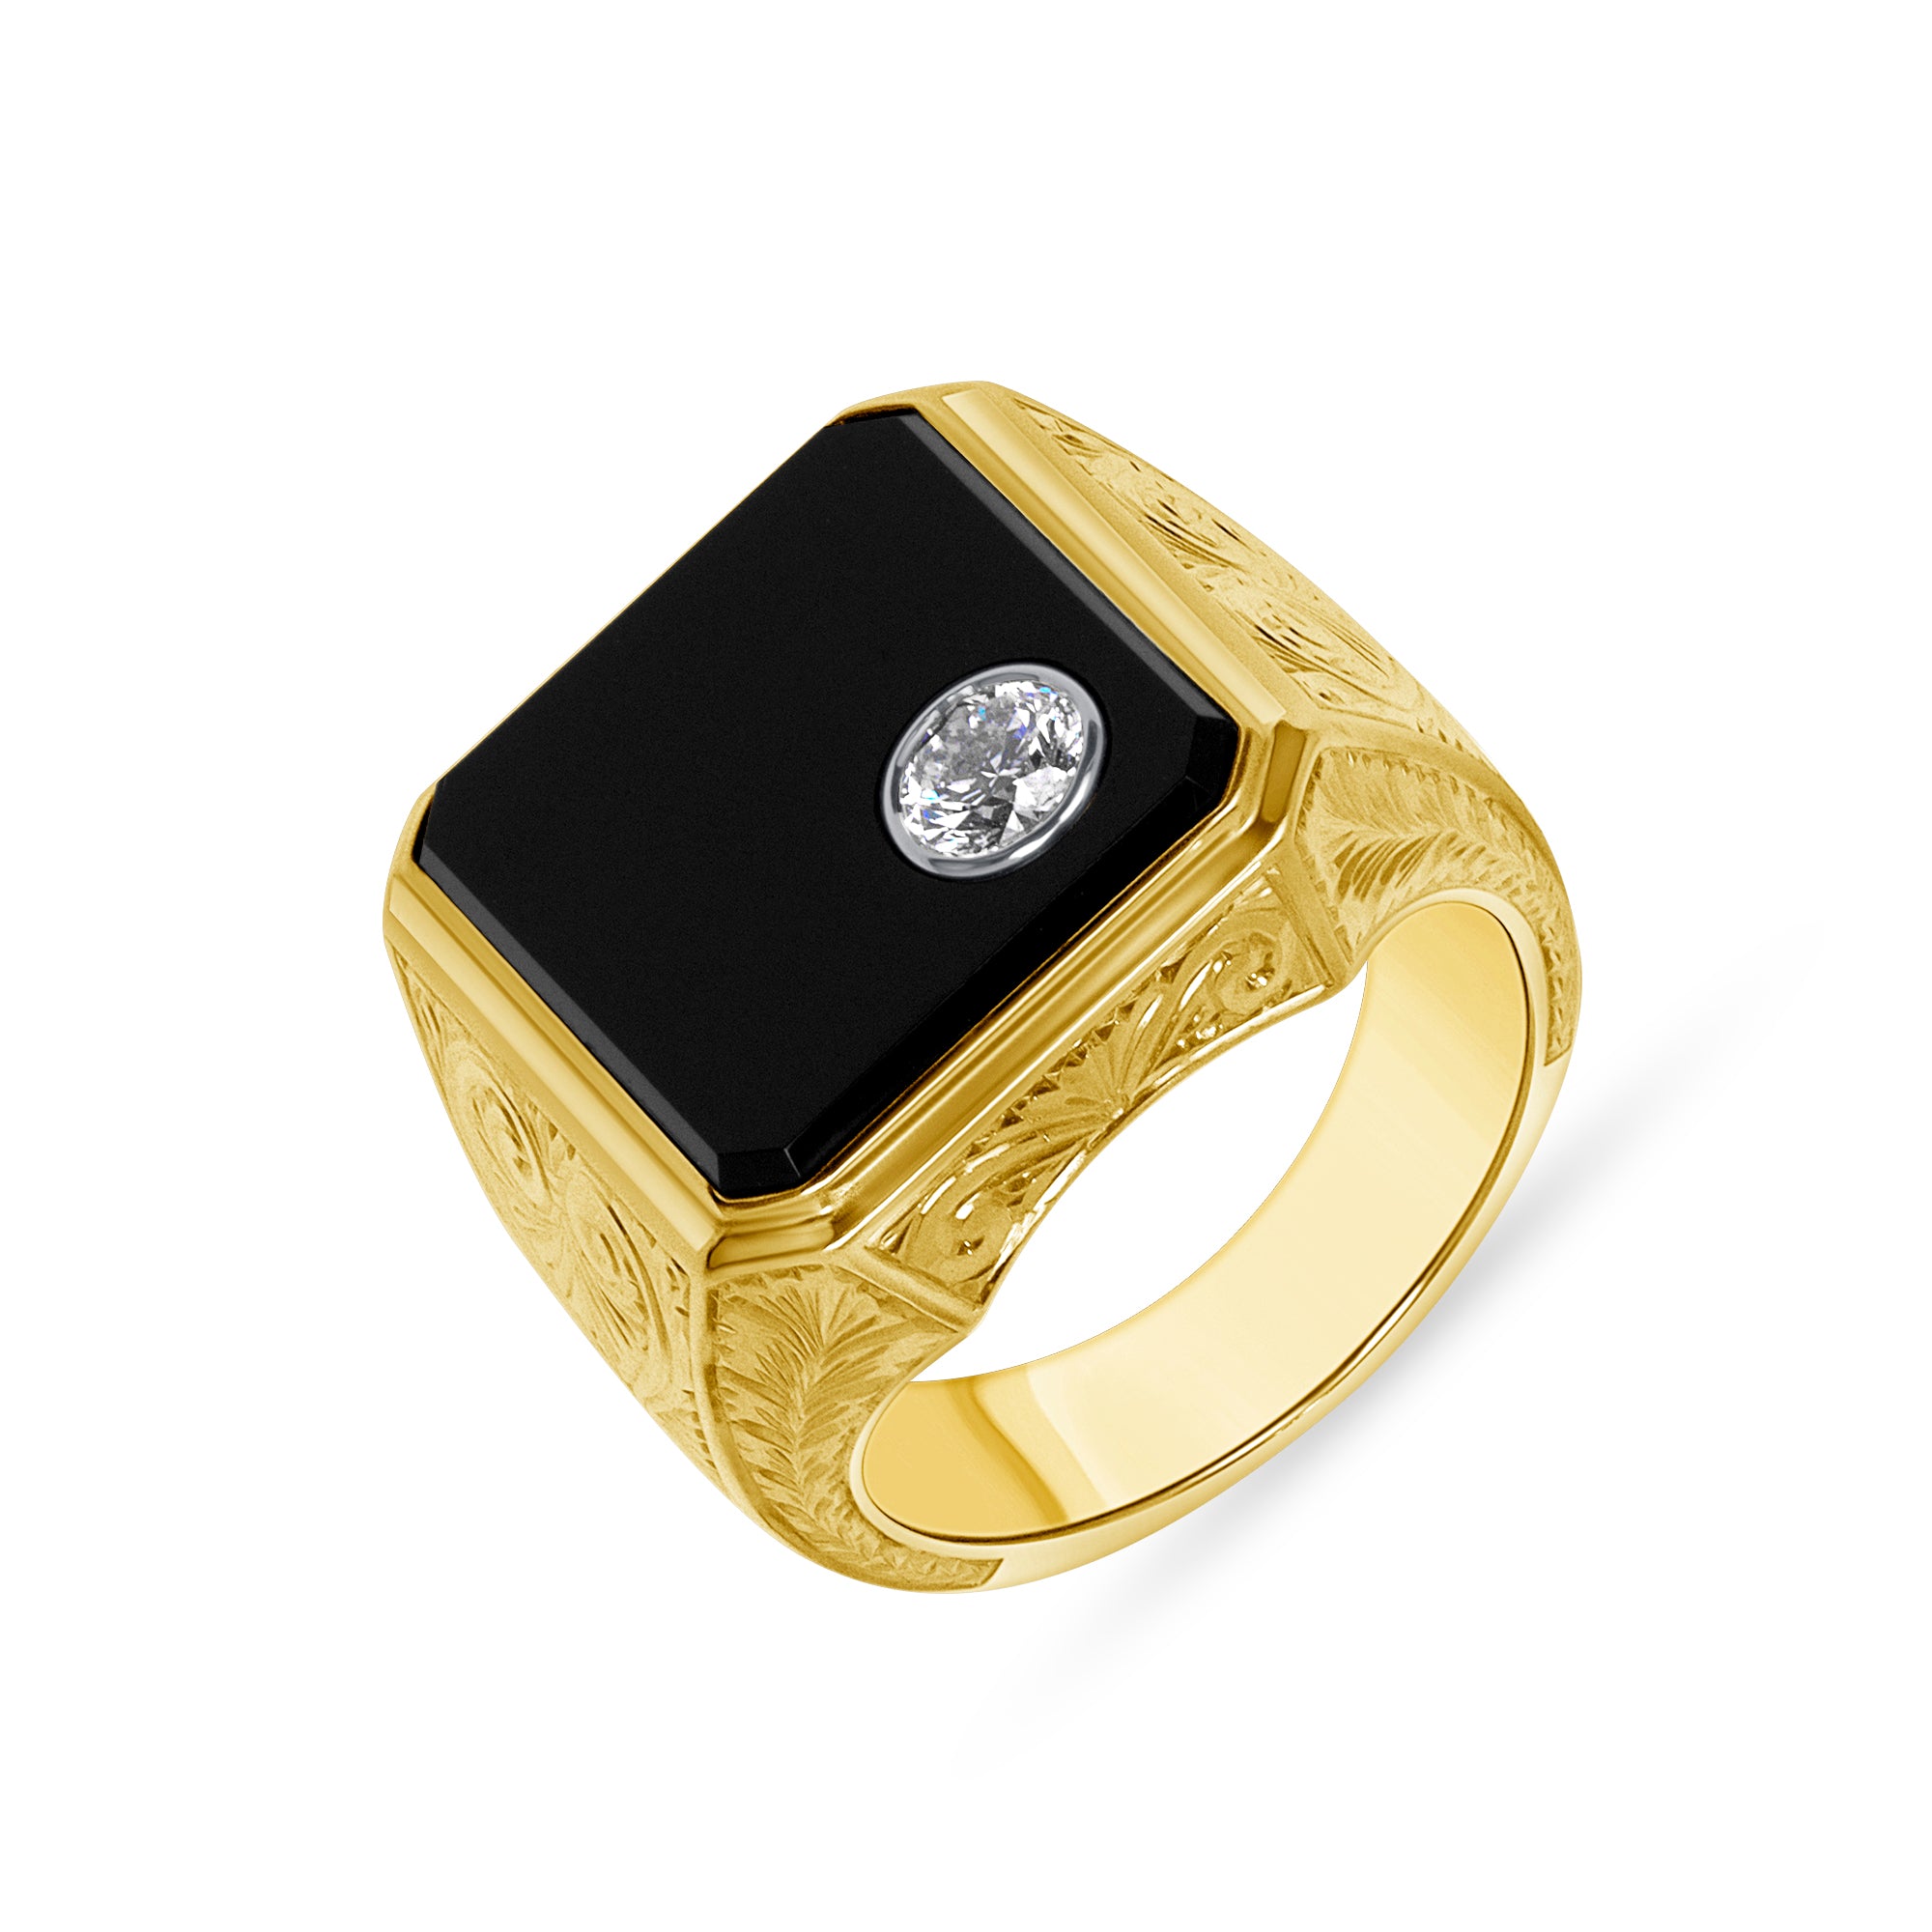 Bezel Set Round Cut Diamond Detailed Signet Ring with Black Enamel in Two Tone Gold